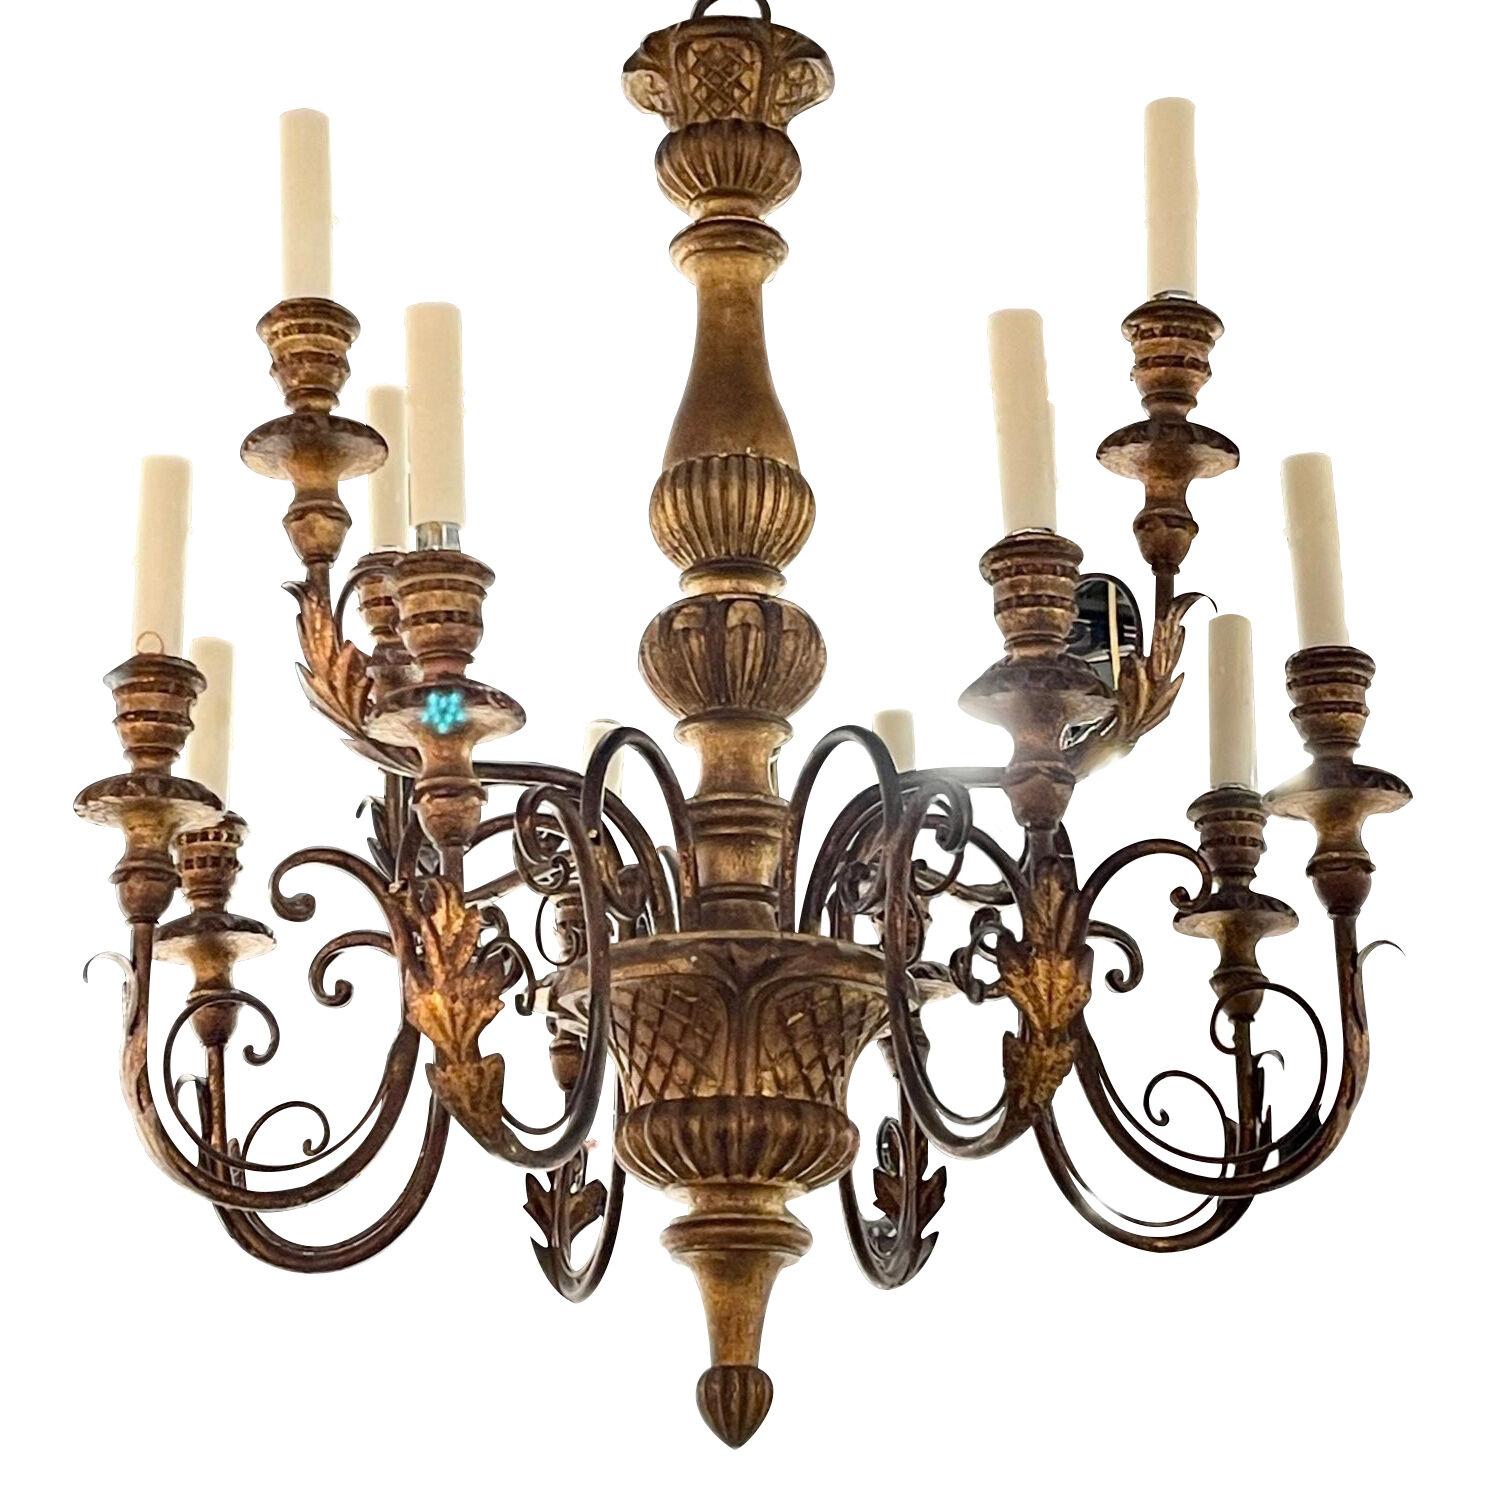 Antique Carved and Giltwood Italian Chandelier